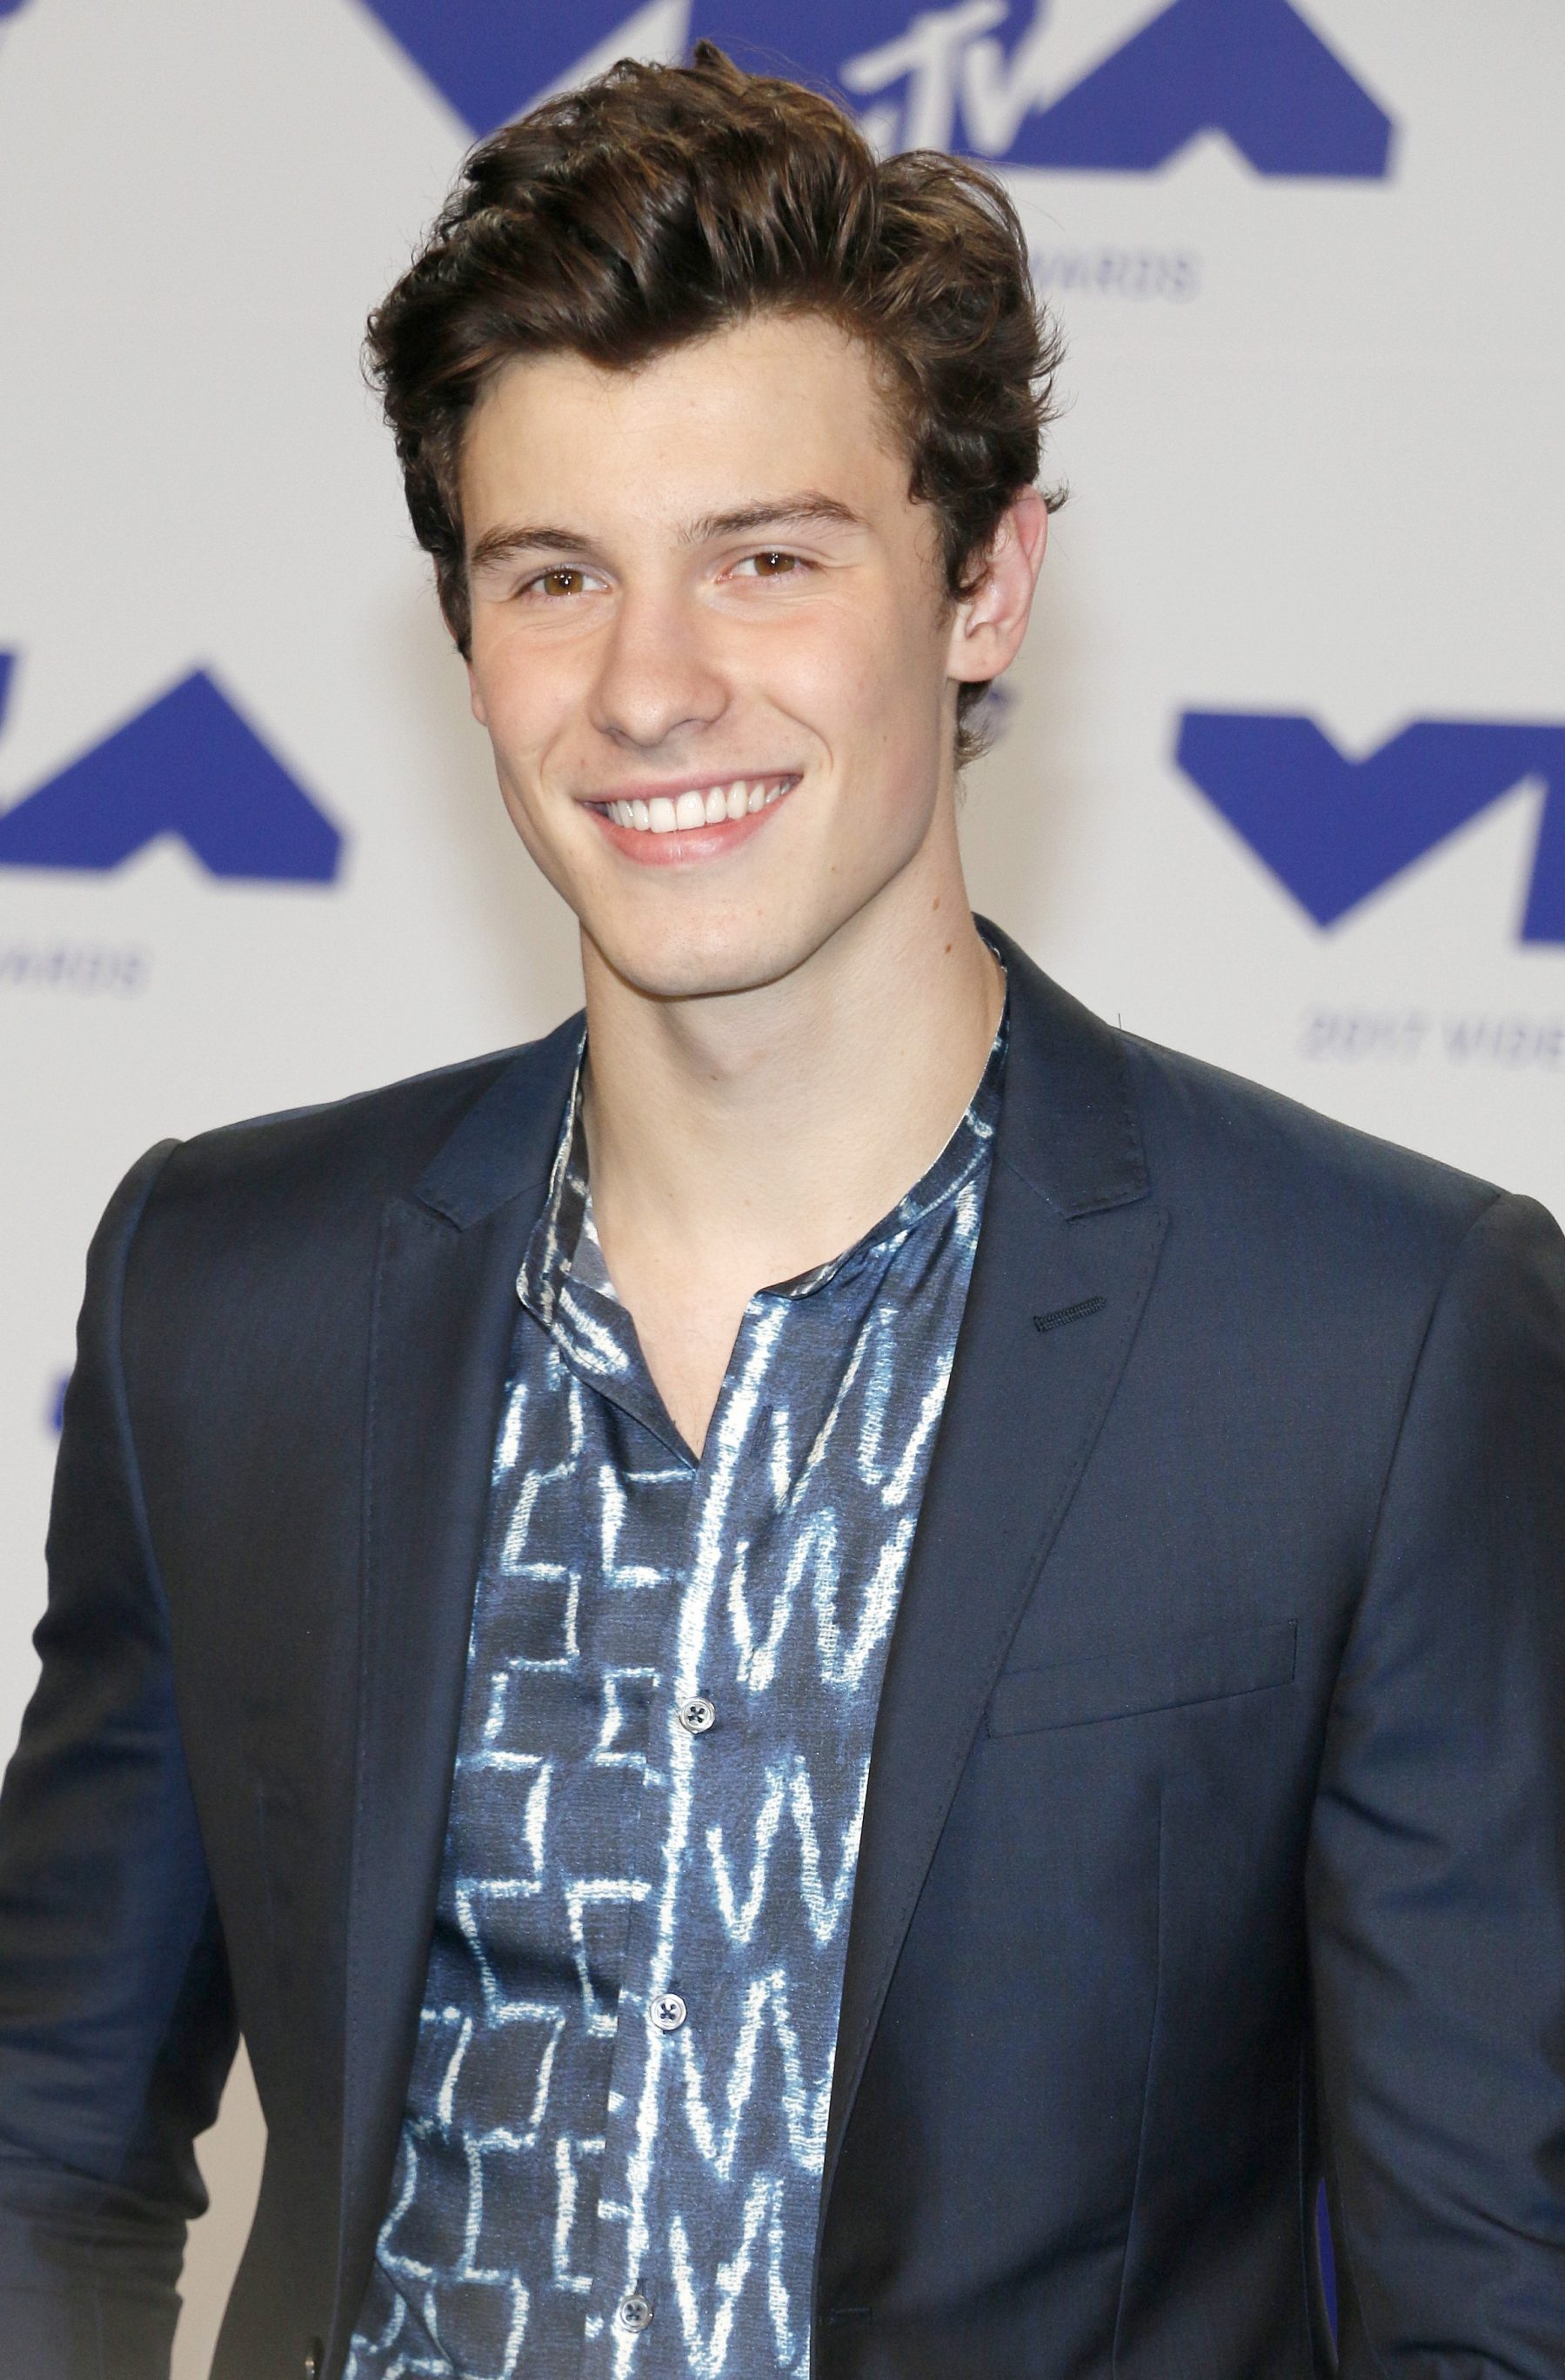 Shawn Mendes - “Prince of Pop” - Singer - Songwriter
Shawn Mendes
Prince of Pop